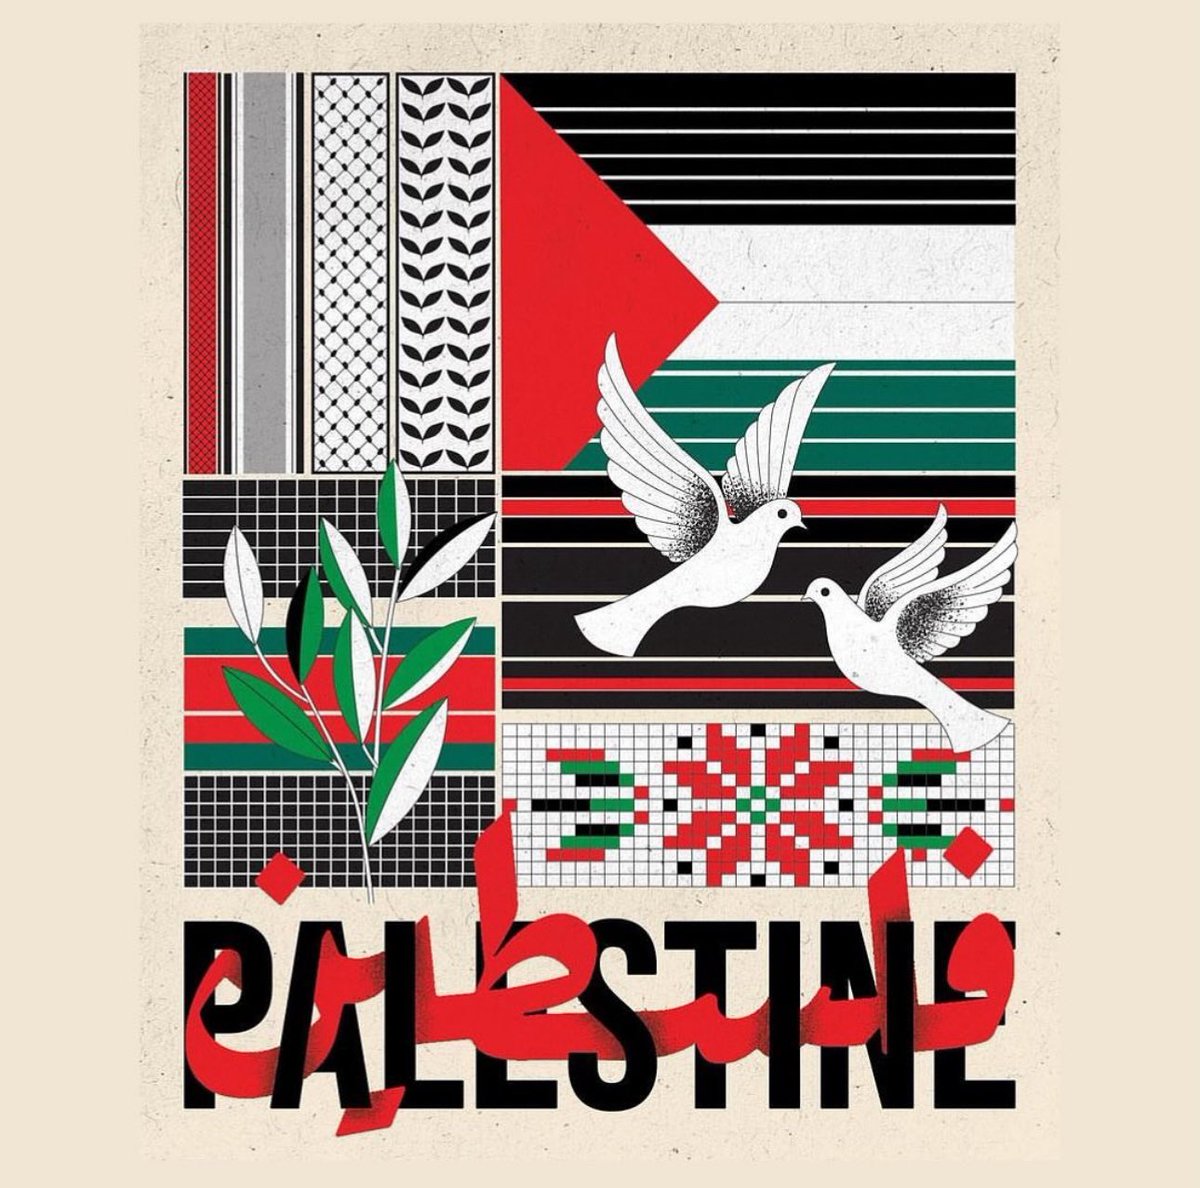 #liviesforpalestine feel free to drop more links in comments, here’s some: 

art by @/mayaliartist 

spreadsheet with gofundmes docs.google.com/spreadsheets/u…
document with gofundmes docs.google.com/document/d/1-O…
donate to careforgaza gofundme.com/f/CareForGaza